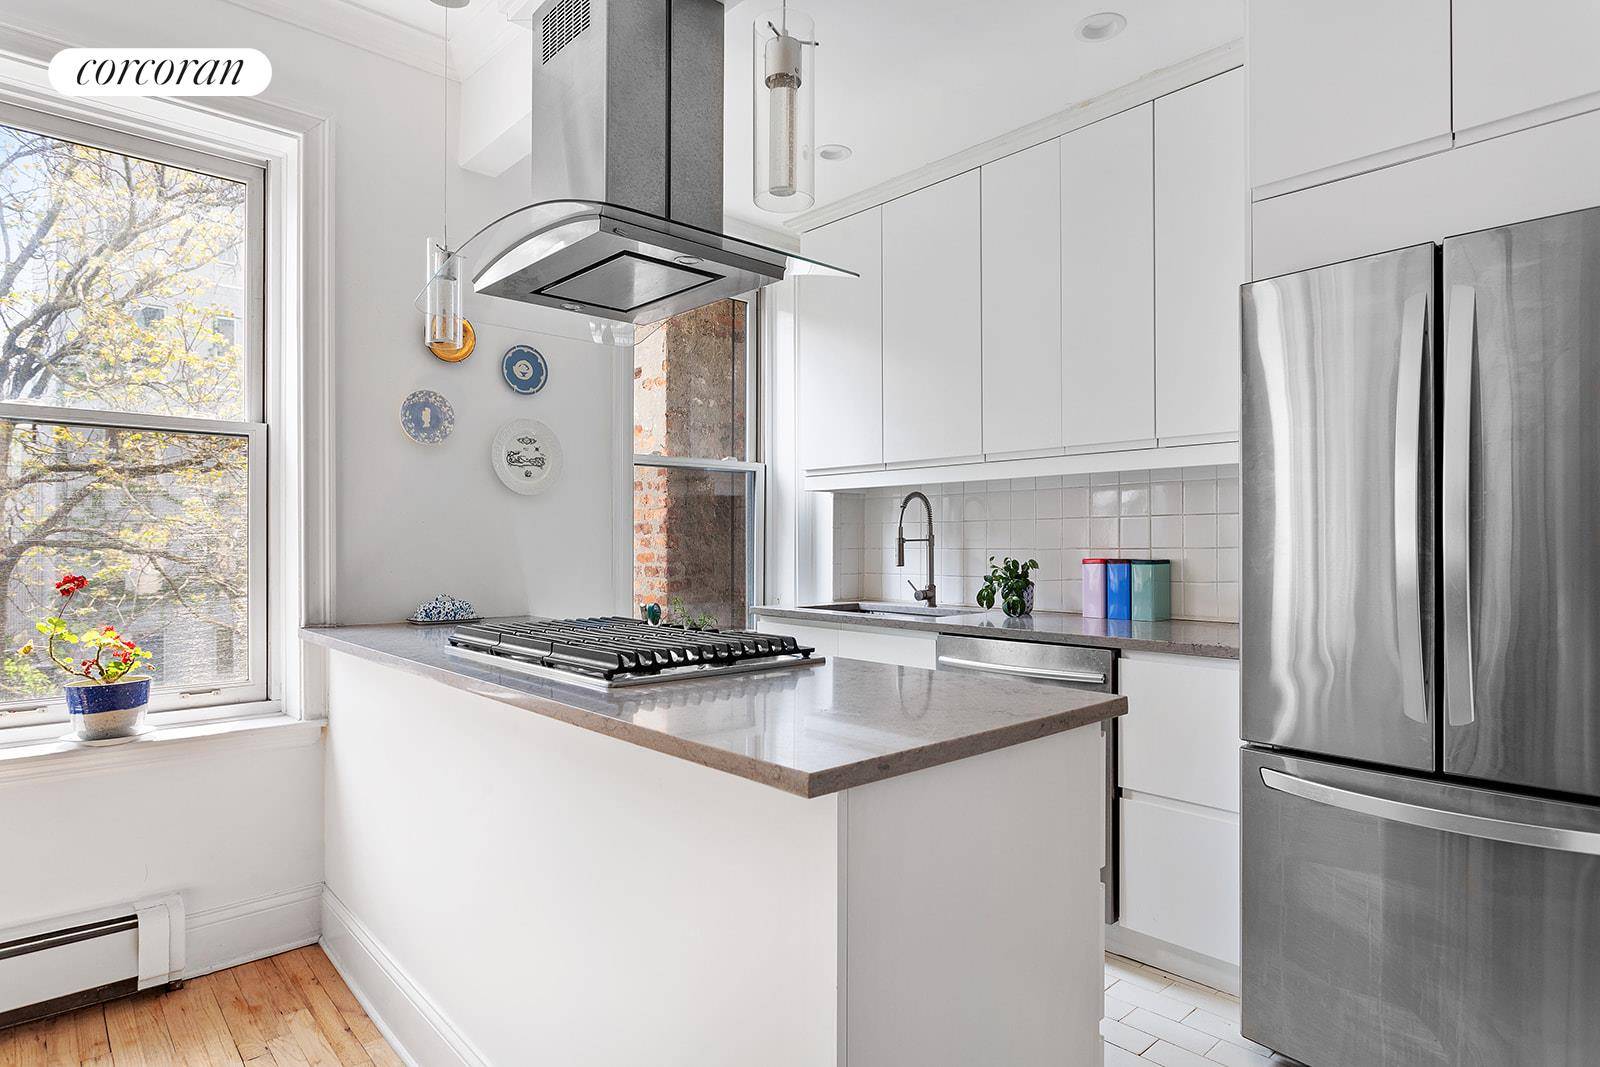 Incredible investment opportunity to purchase a tastefully renovated Two Family Brick Home, 546 Pacific Street in the epicenter of Boerum Hill !